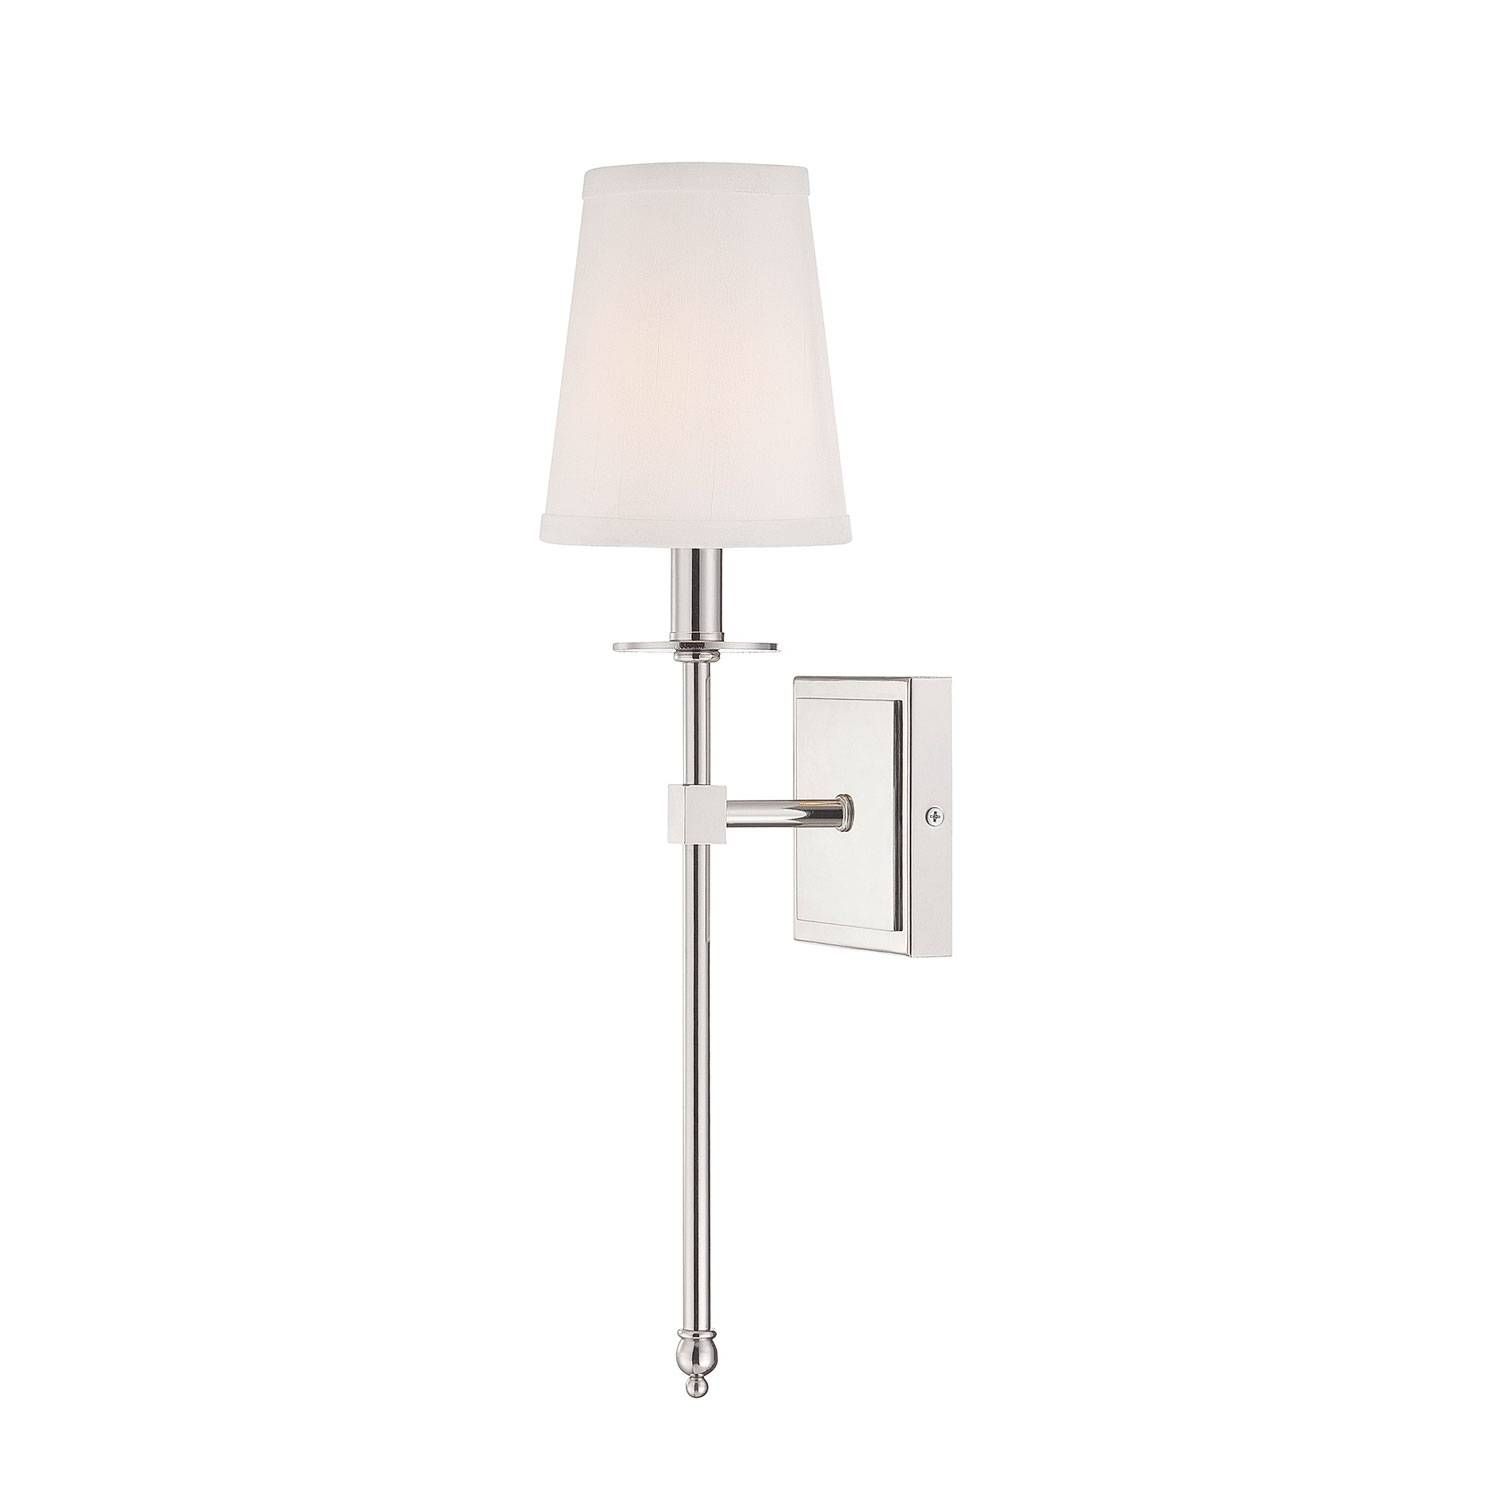 Lamps: Improve Your Interior Lighting Using Stylish Bellacor Intended For West Elm Bathroom Pendant Lights (View 8 of 15)